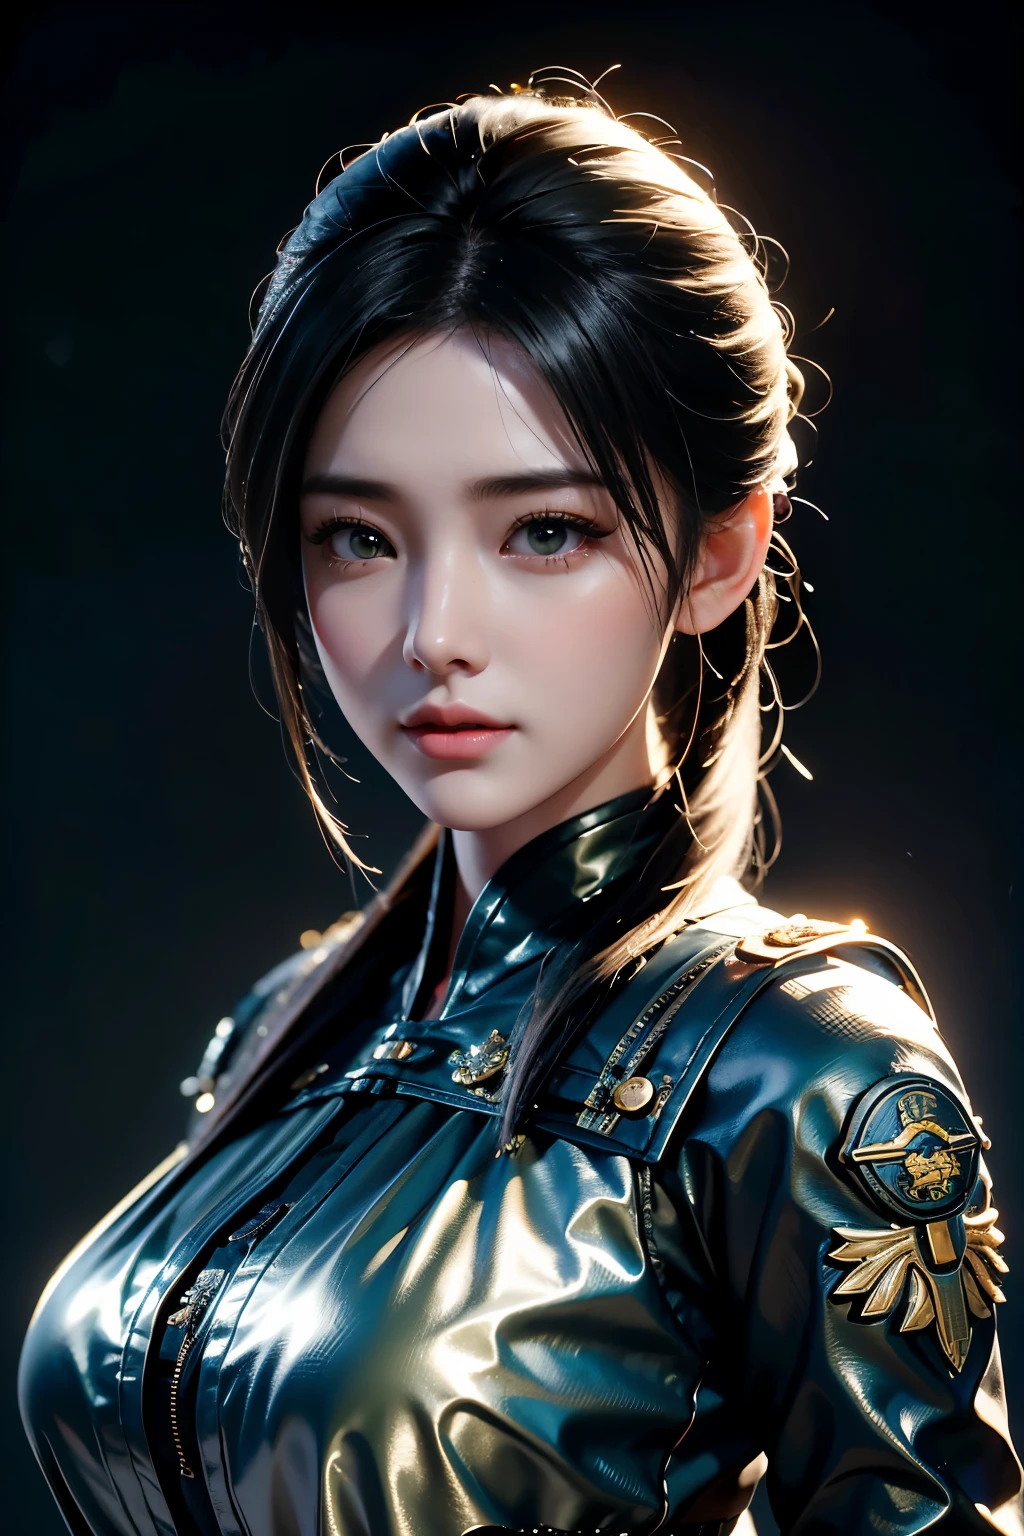 Game art，The best picture quality，Highest resolution，8K，((A bust photograph))，((Portrait))，(Rule of thirds)，Unreal Engine 5 rendering works， (The Girl of the Future)，(Female Warrior)，22-year-old girl，(Hair random)，(Future-style military wear，A beautiful eye full of detail)，(Big breasts)，(Eye shadow)，Elegant and charming，Smile，(frown)，(Future-style army dress，A dress characteristic of a police uniform，A dress with delicate patterns，A glowing badge)，Cyberpunk Characters，Future Style， Photo poses，Street background，Movie lights，Ray tracing，Game CG，((3D Unreal Engine))，oc rendering reflection pattern